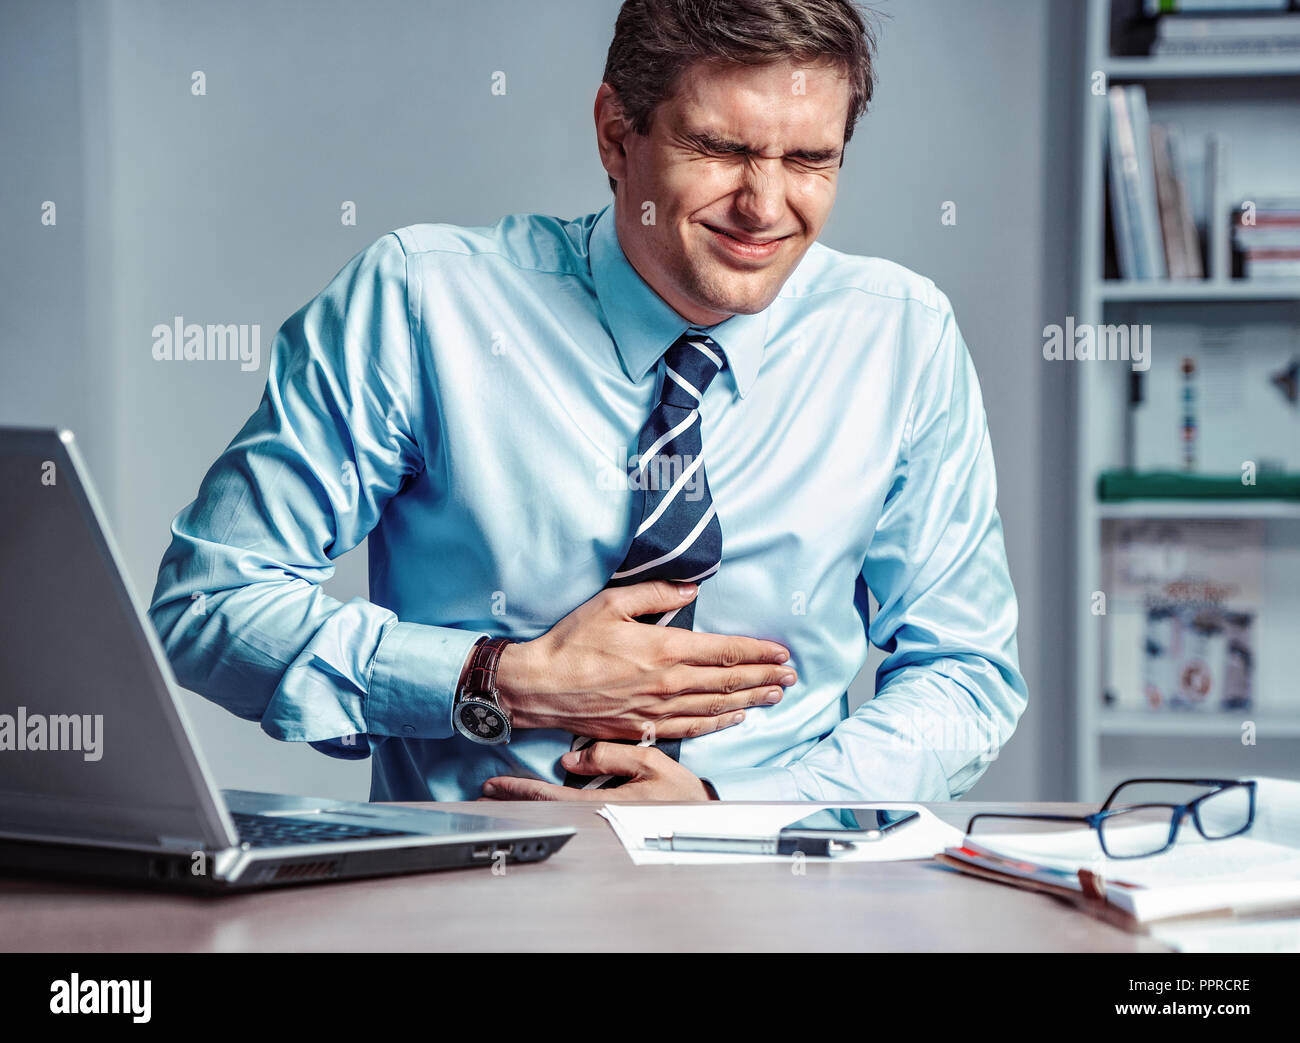 Employee suffers from severe pain in stomach. Photo of man working in the office. Medical concept. Stock Photo